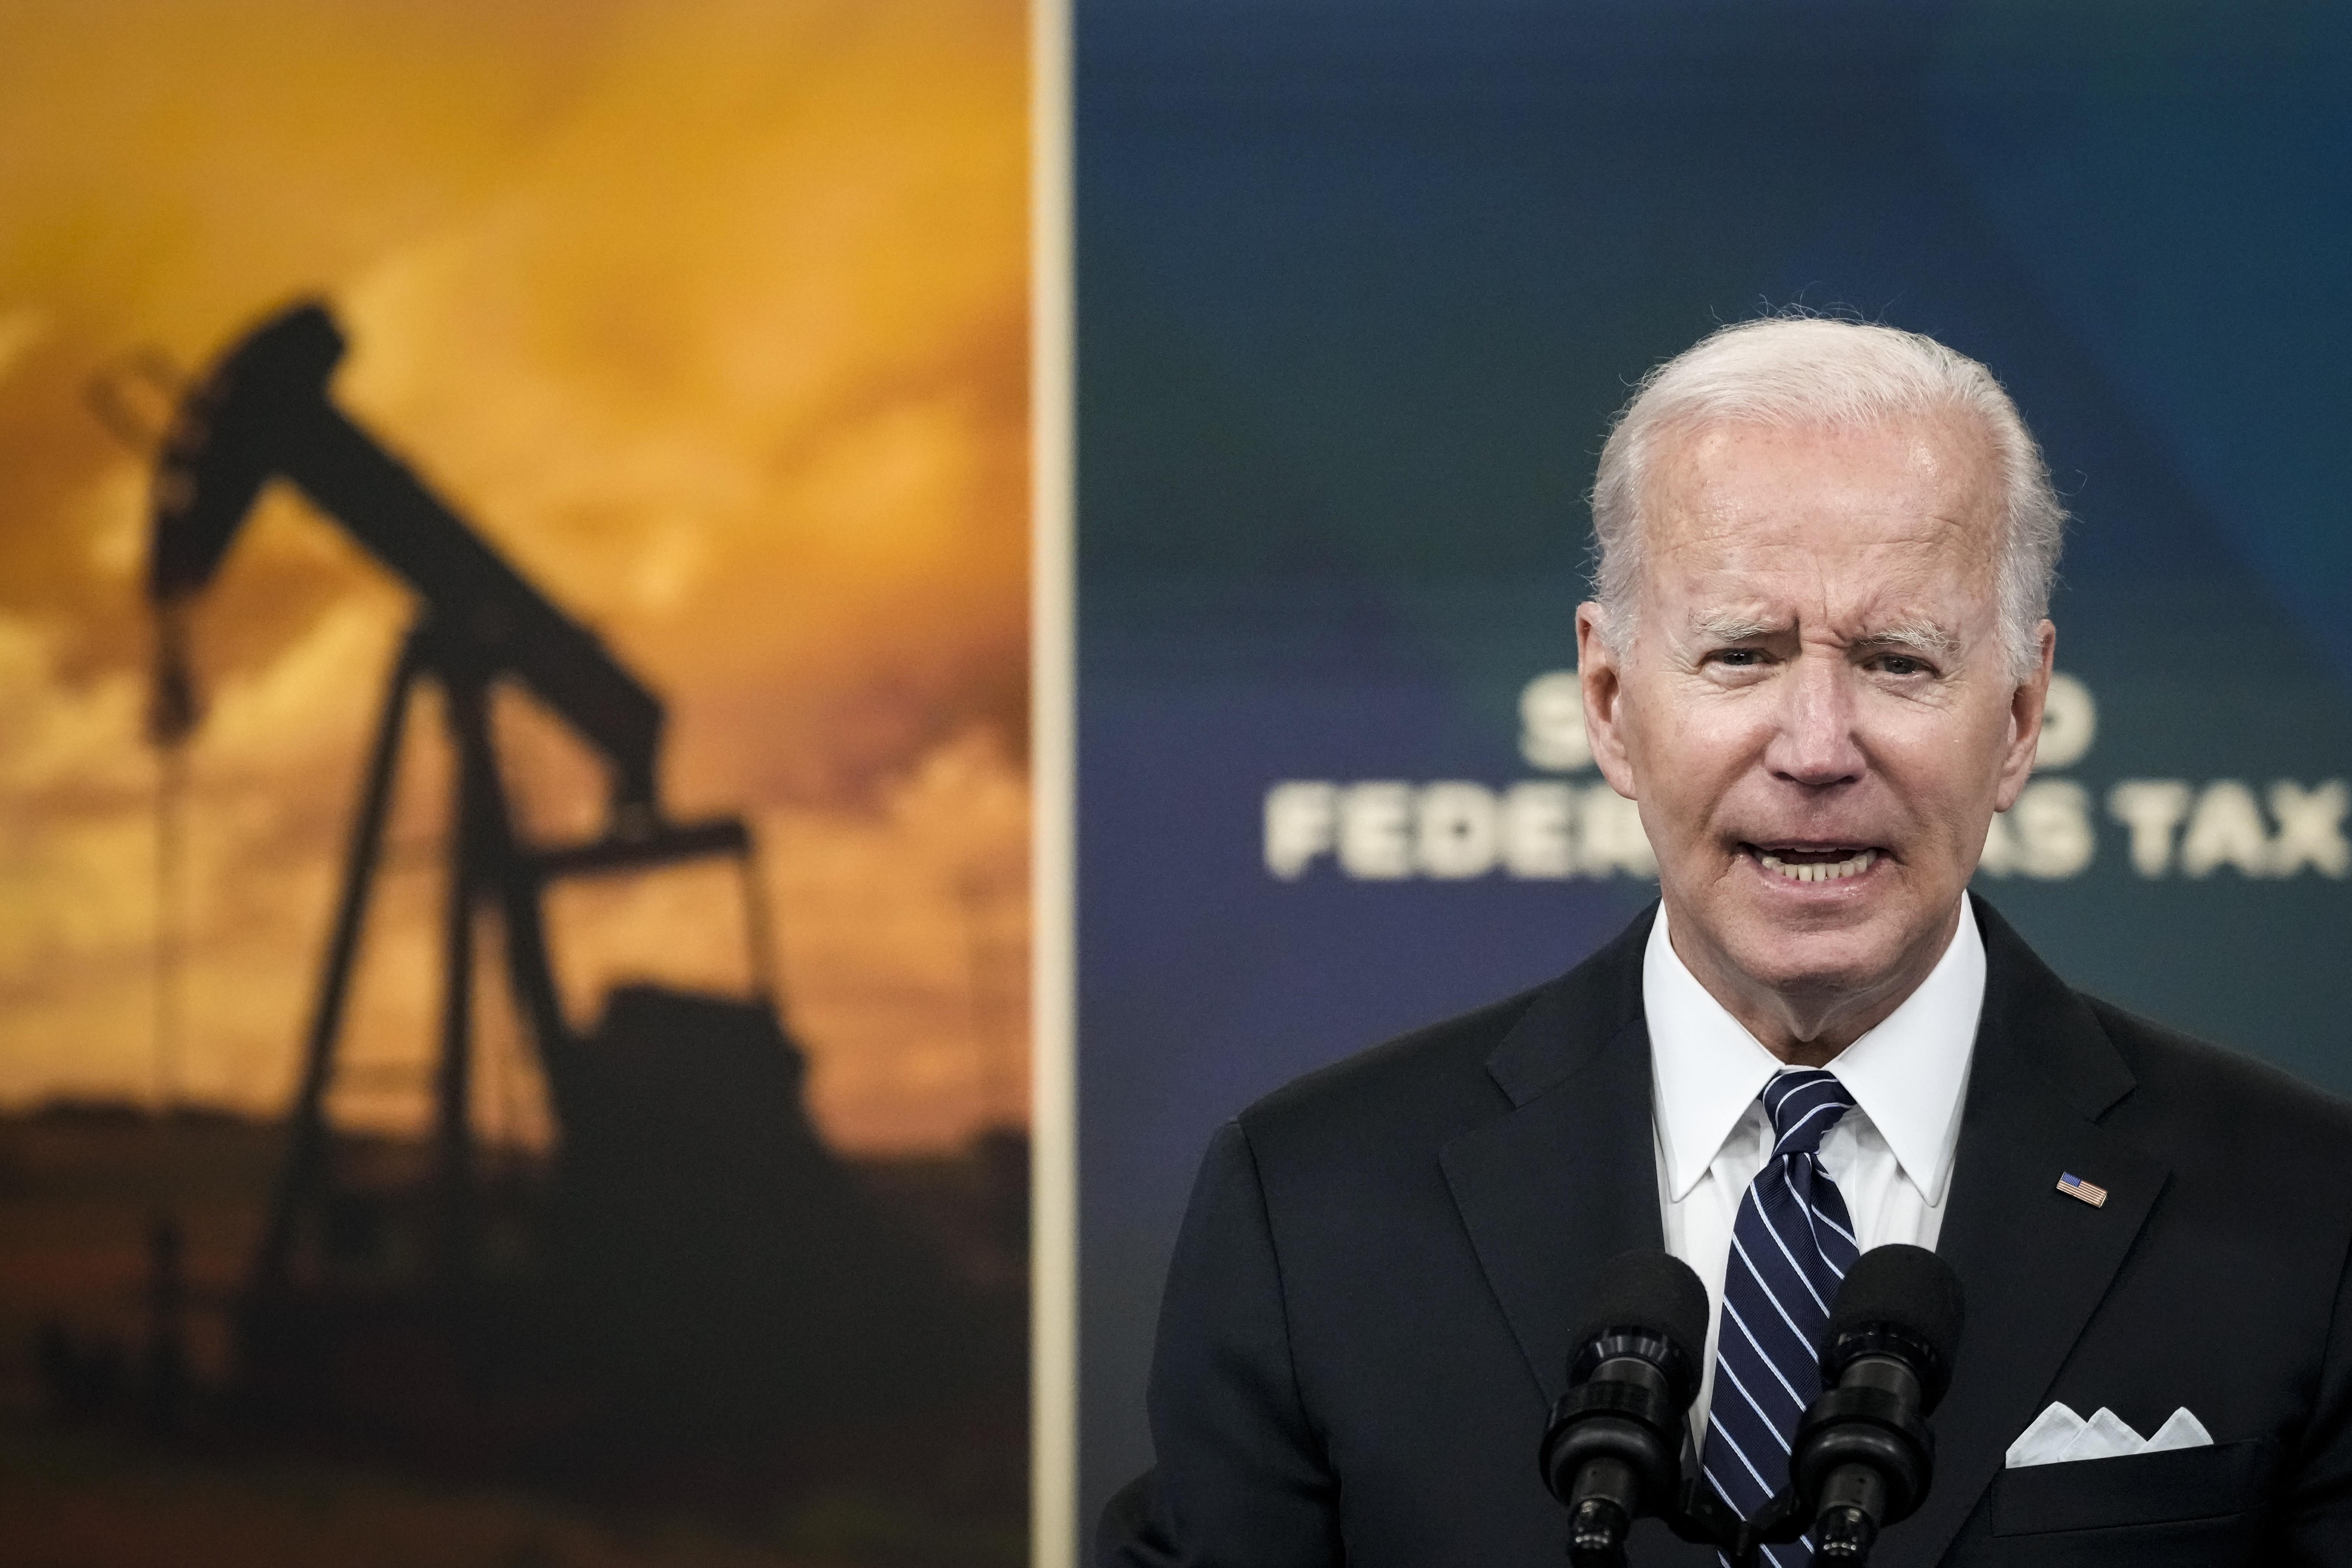 U.S. President Joe Biden speaks about gas prices in the South Court Auditorium at the White House campus on June 22, 2022 in Washington, DC. Biden called on Congress to temporarily suspend the federal gas tax. (Photo by Drew Angerer/Getty Images)